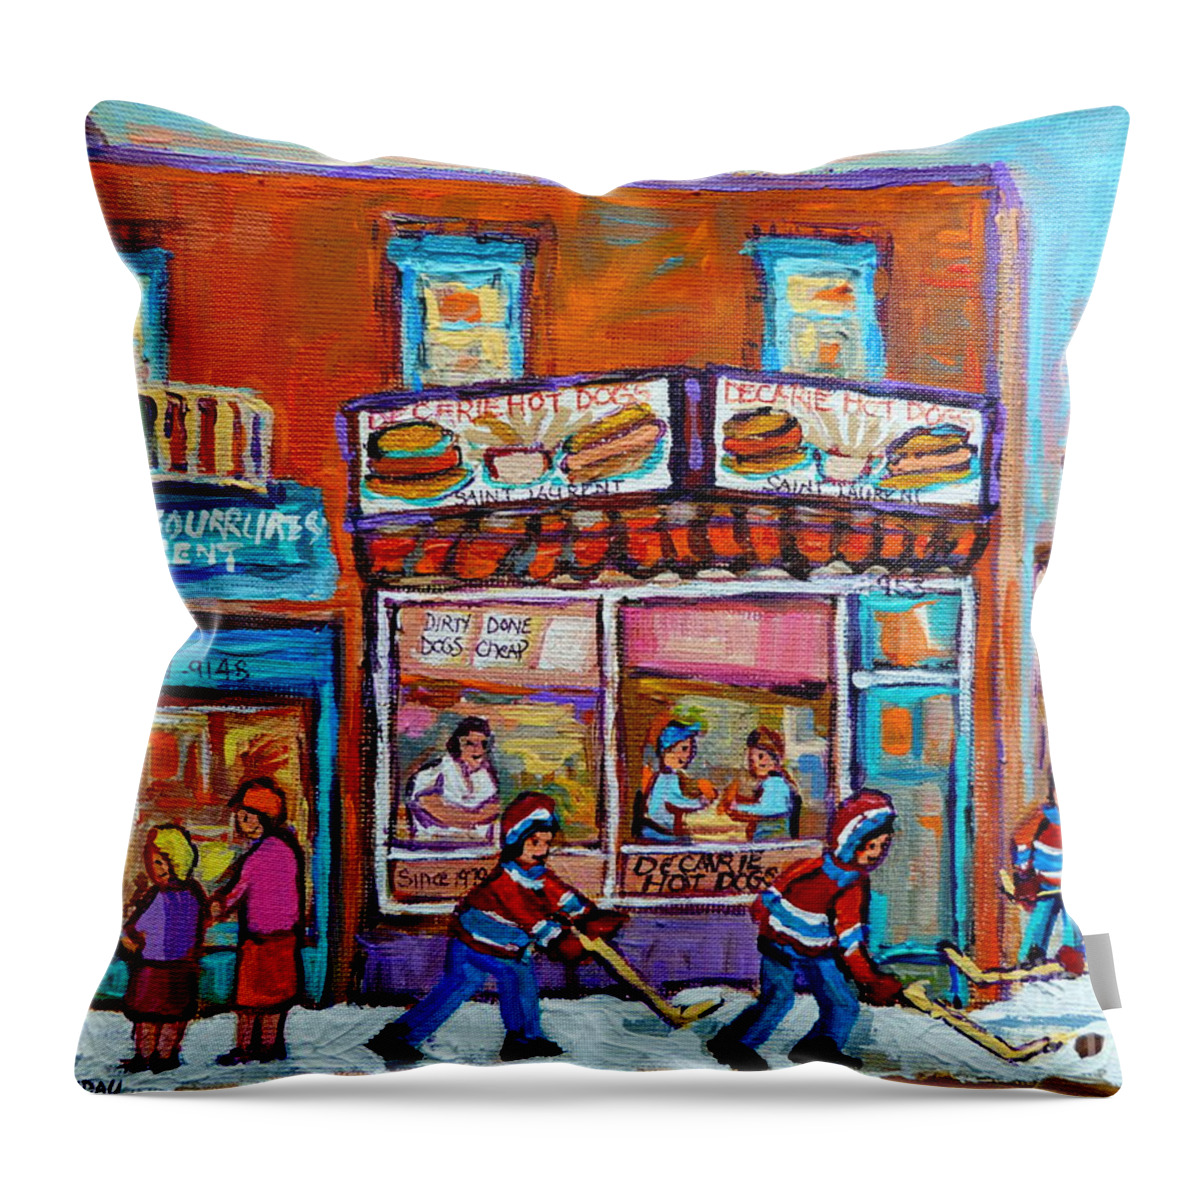 Montreal Throw Pillow featuring the painting Decarie Hot Dog Restaurant Ville St. Laurent Montreal by Carole Spandau